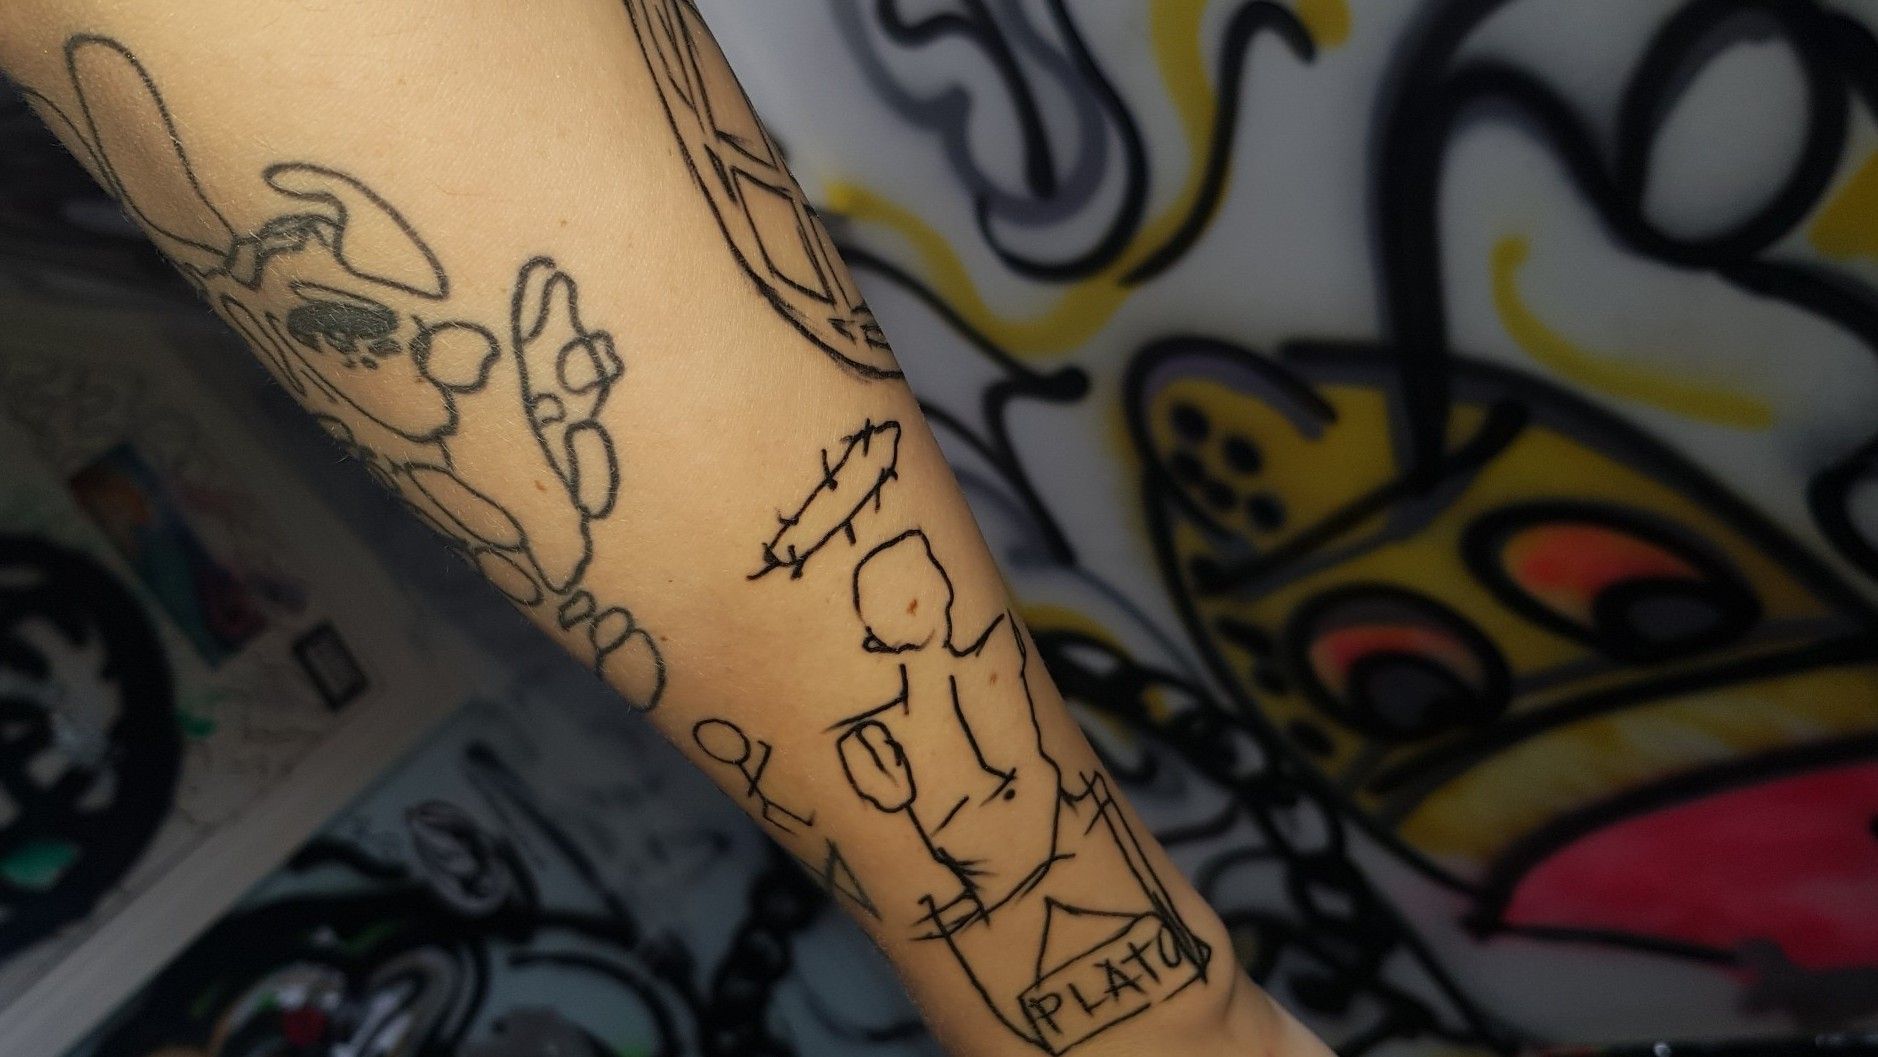 Tattoo uploaded by Luke Ridsdill Smith  A tribe called quest  basquiat  crown  nordic  Tattoodo